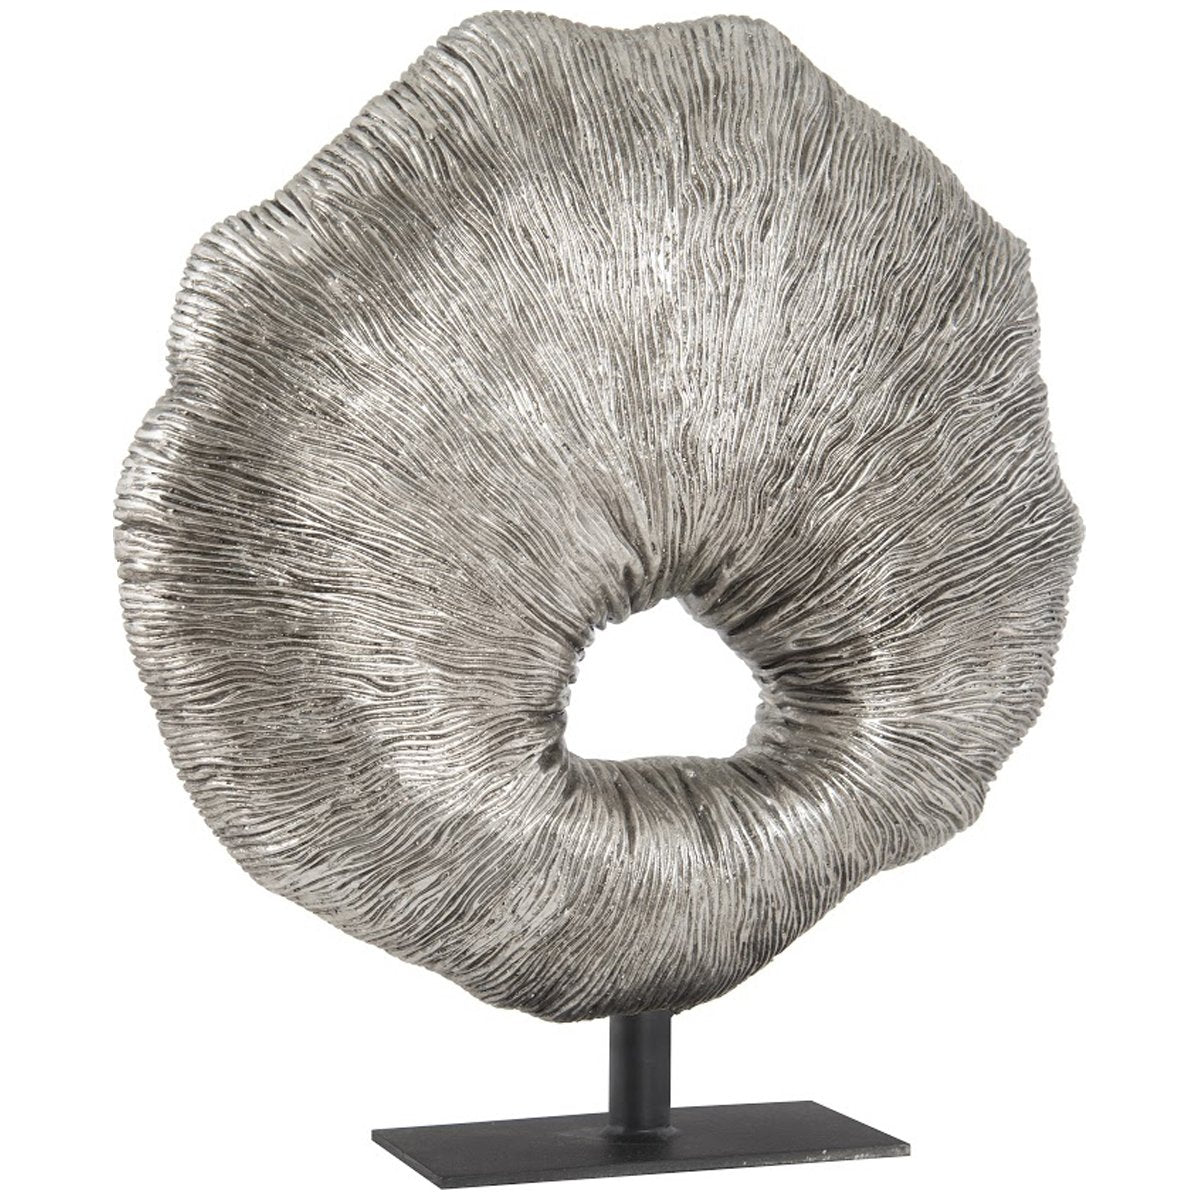 Phillips Collection Fungia Sculpture, Silver Leaf